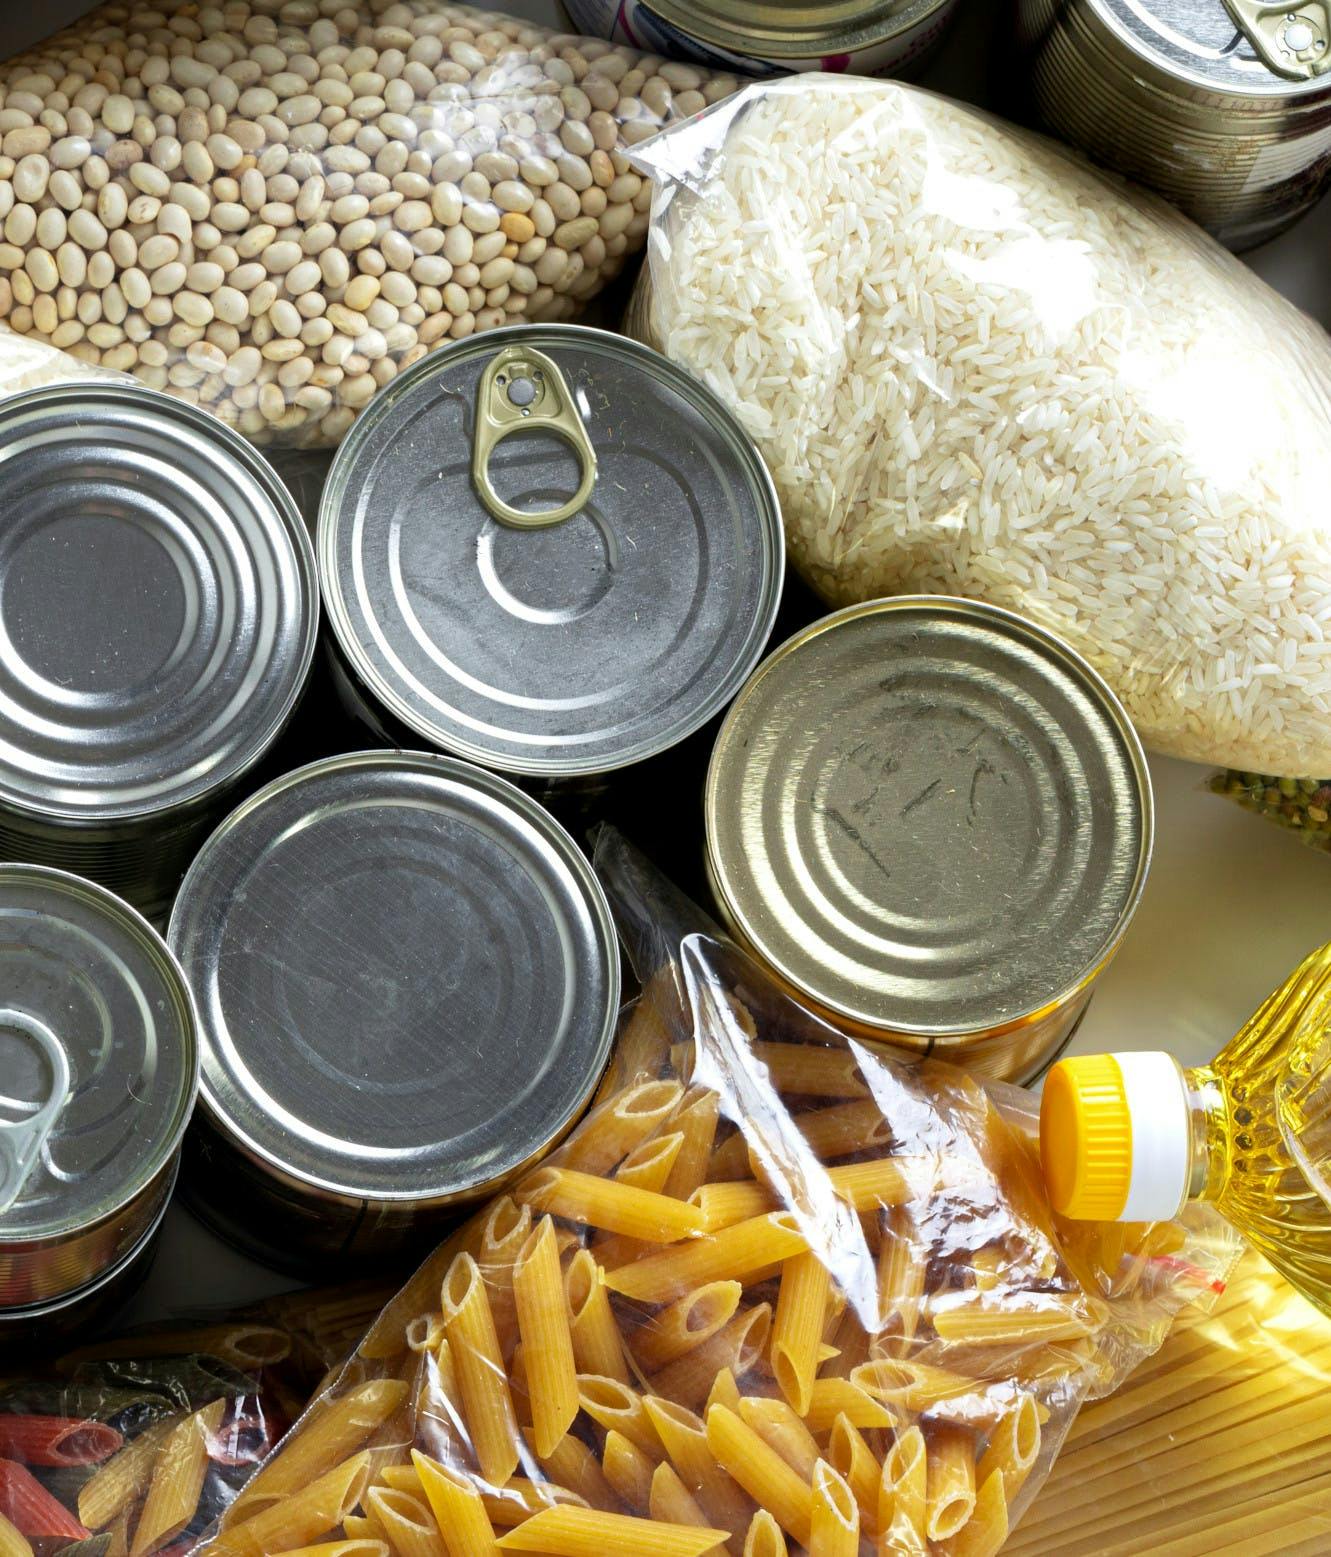 Focus on Independent Foodbanks in the North-West